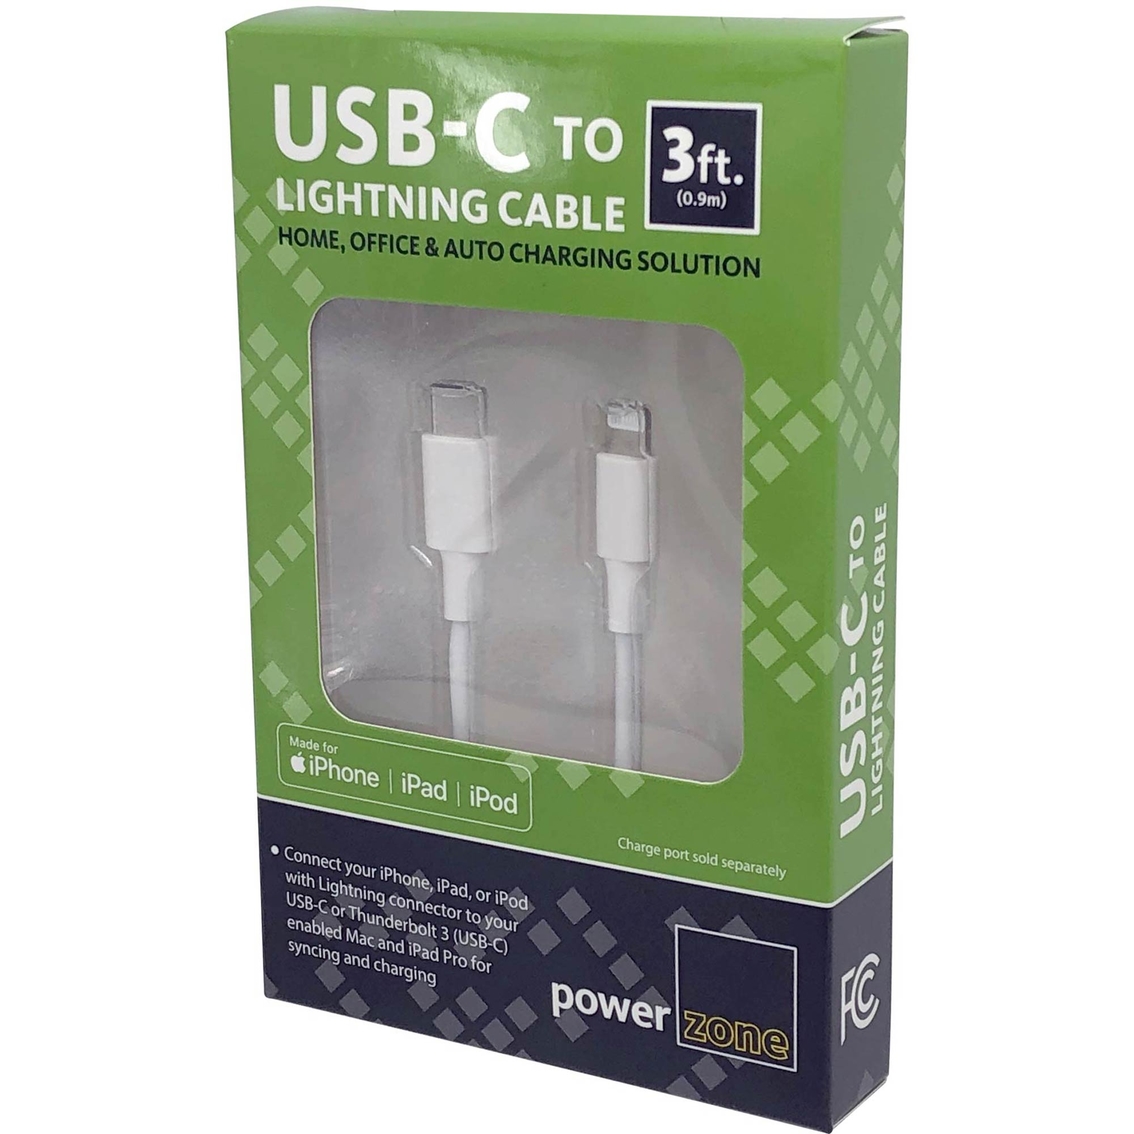 USB Type C to Lightning Cable 3ft White - Image 3 of 3